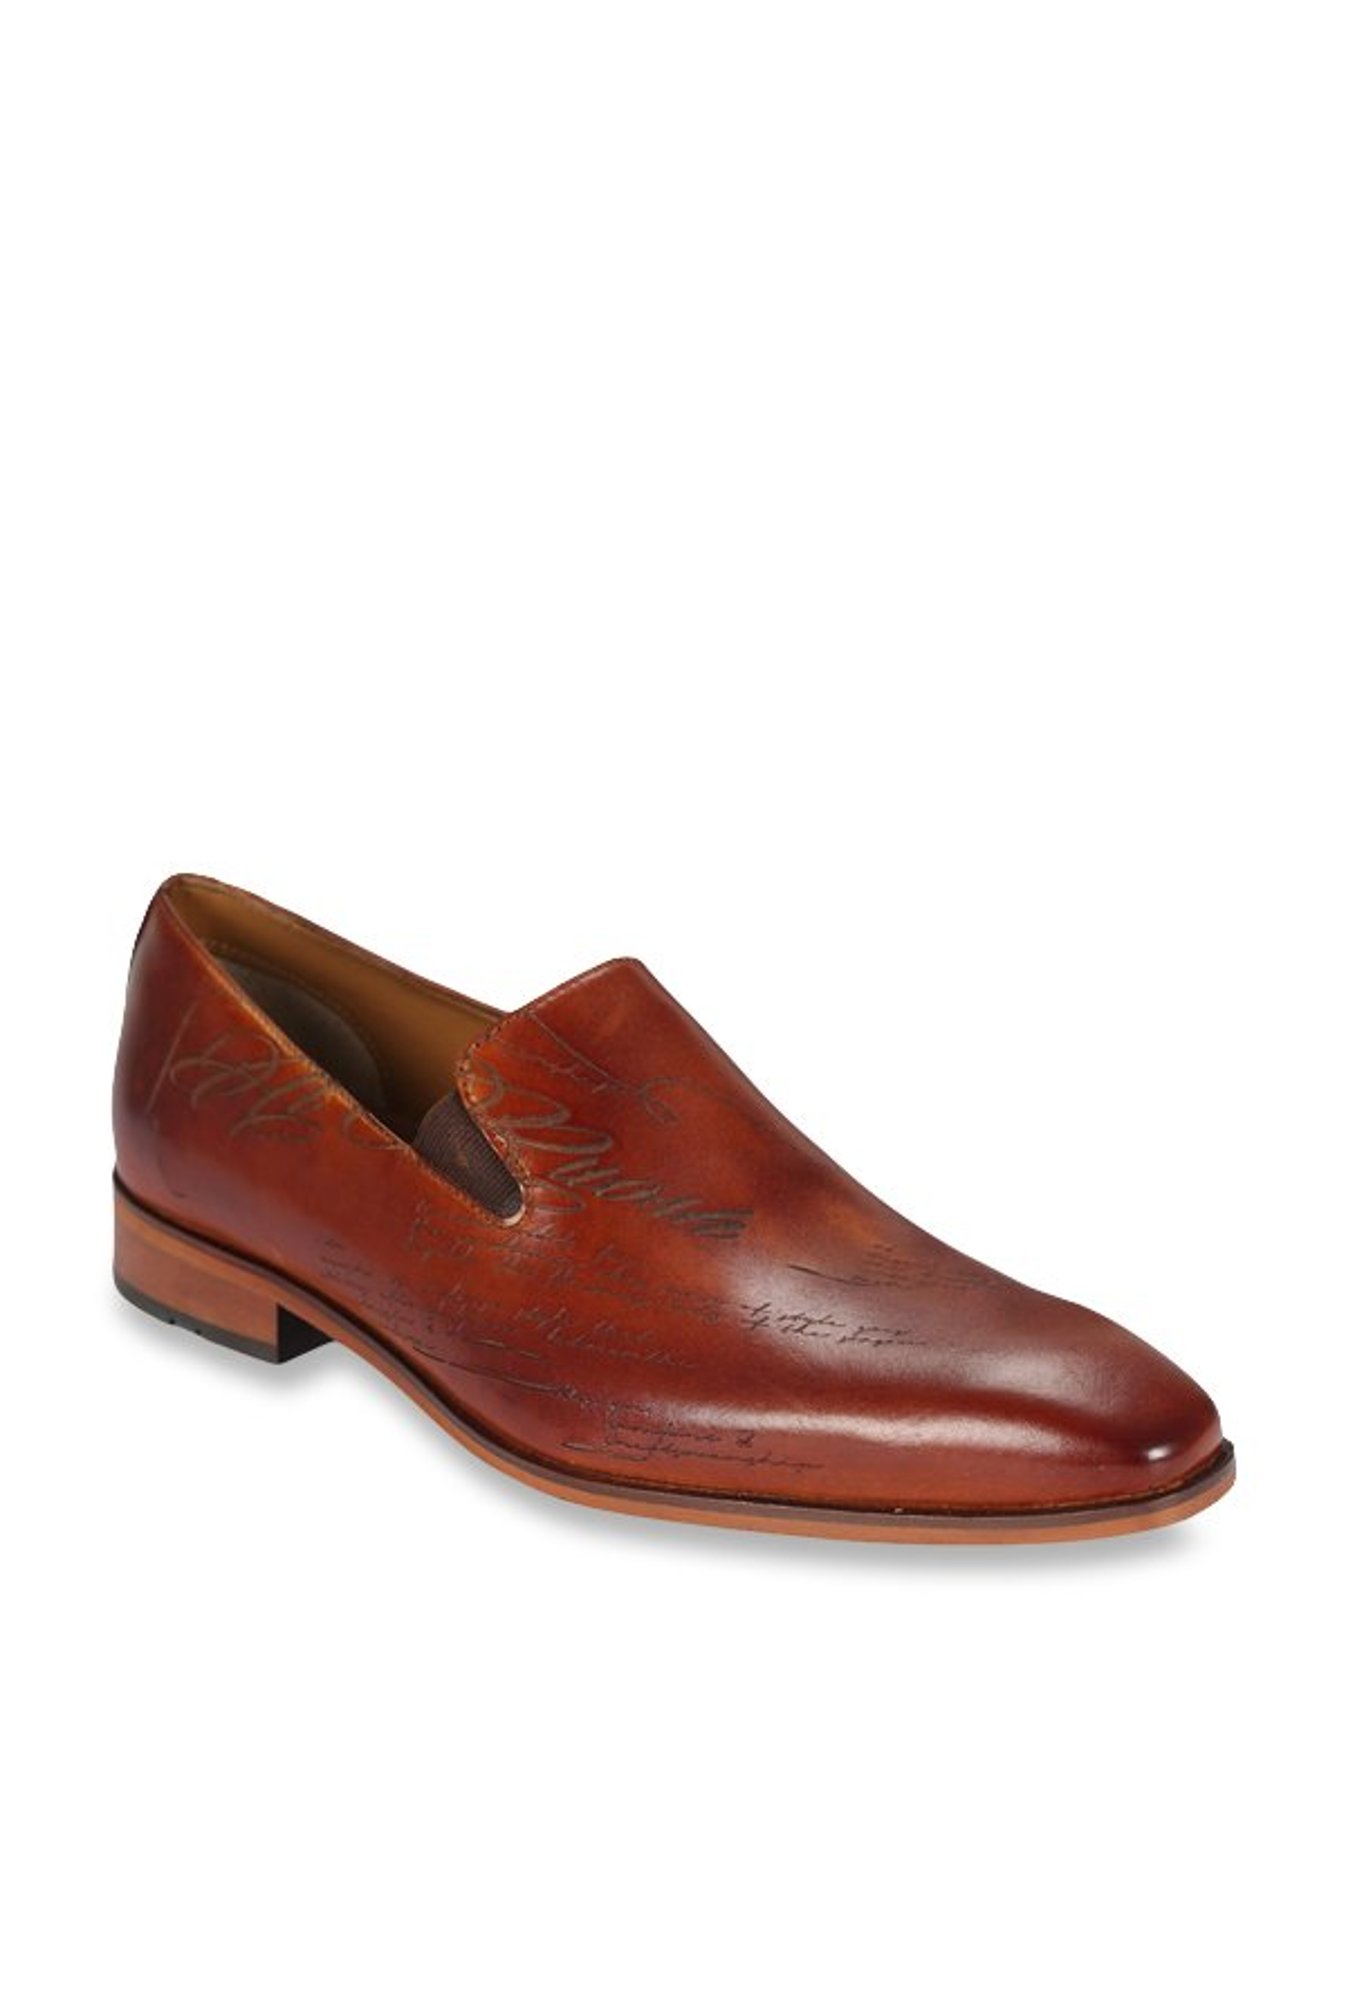 ruosh loafers online india